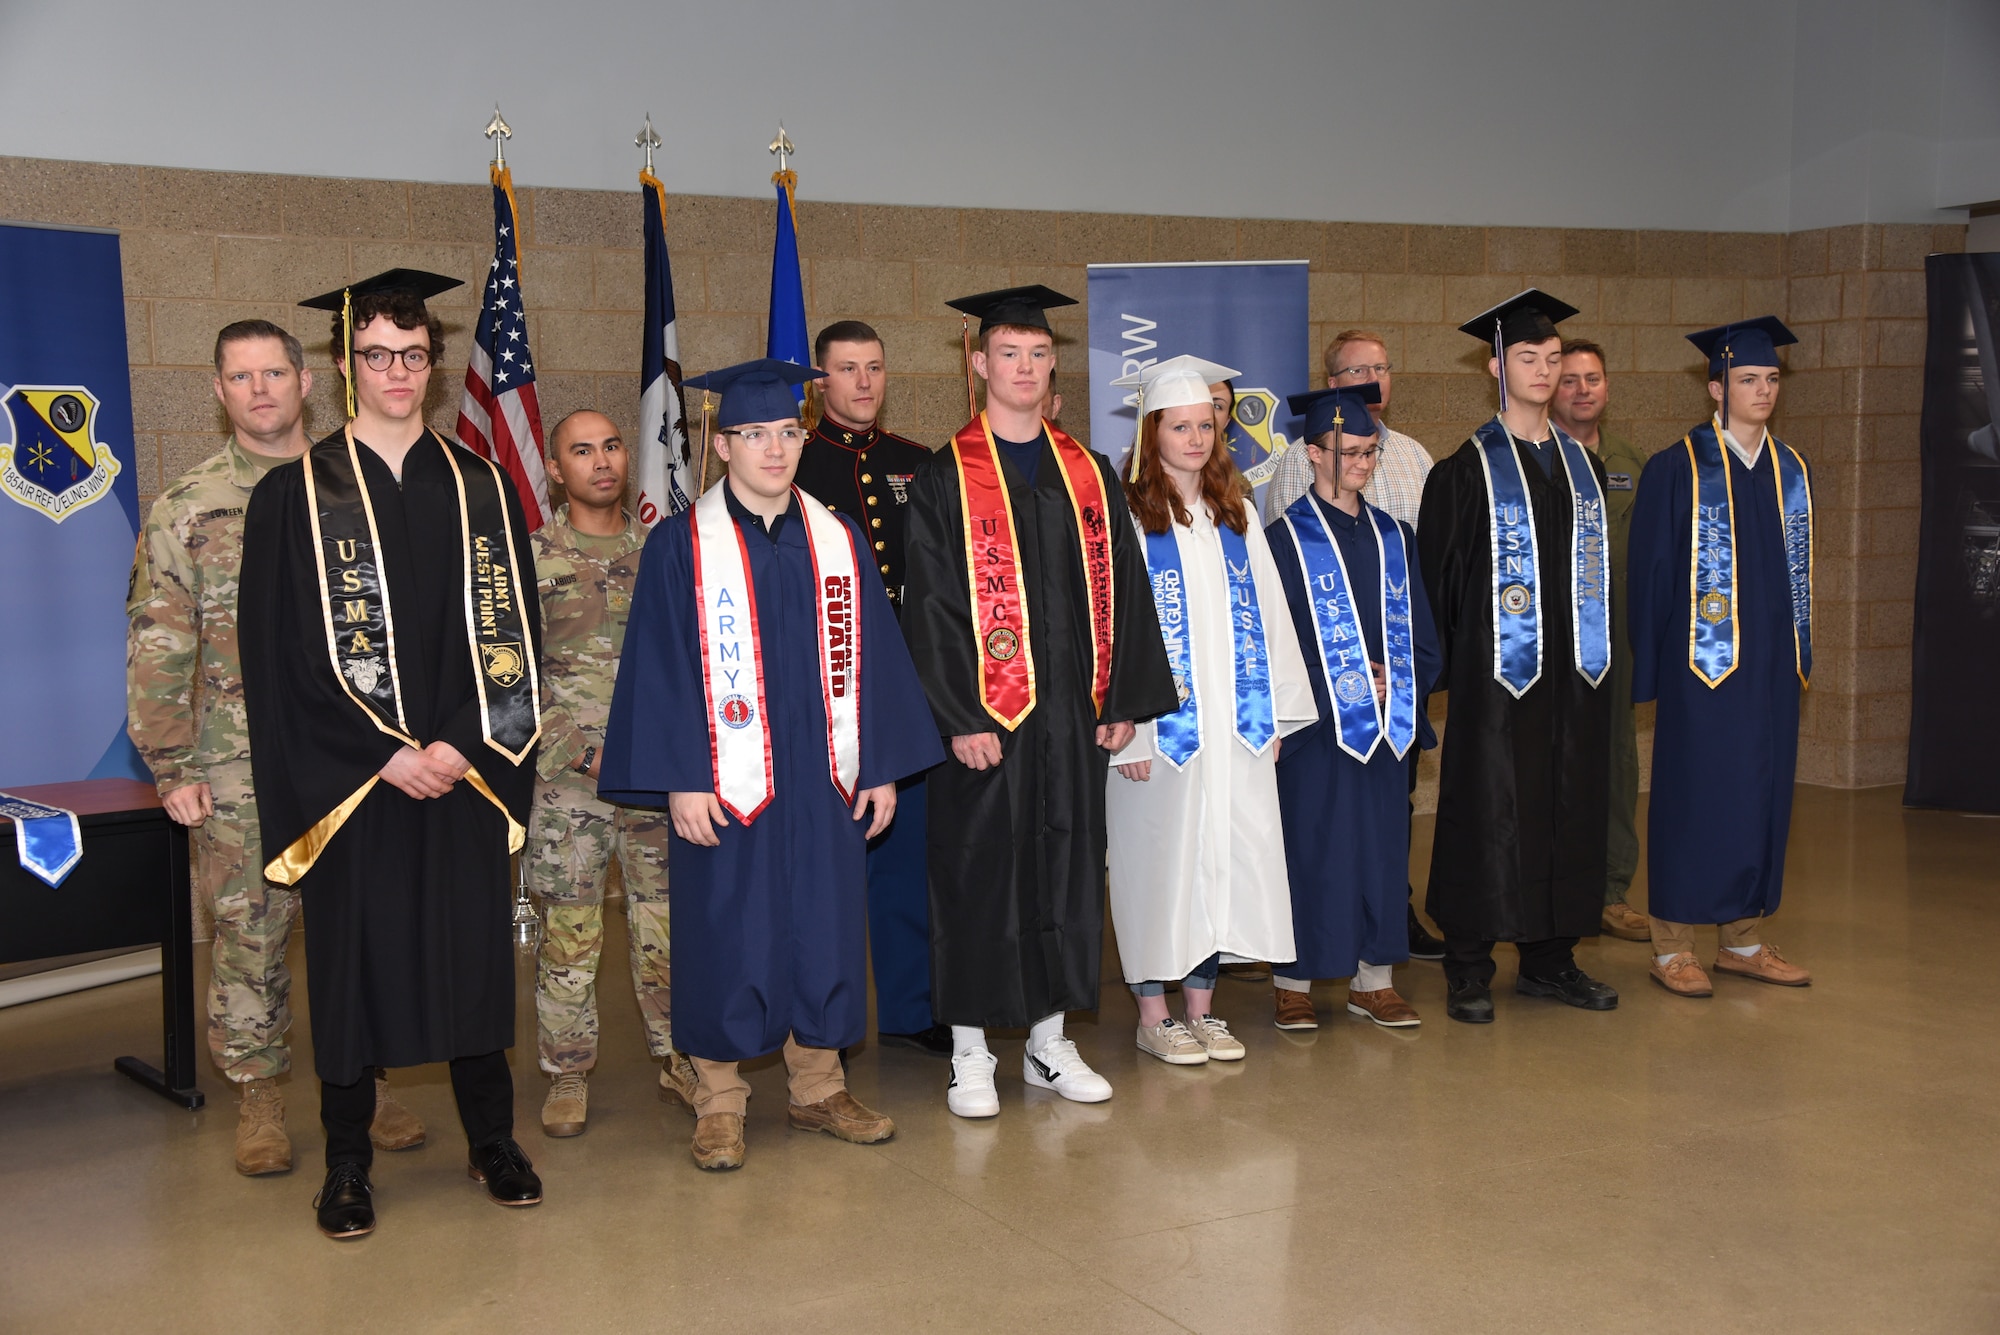 Graduating high school students in Iowa are honored with graduation stoles decorated with special military stoles.